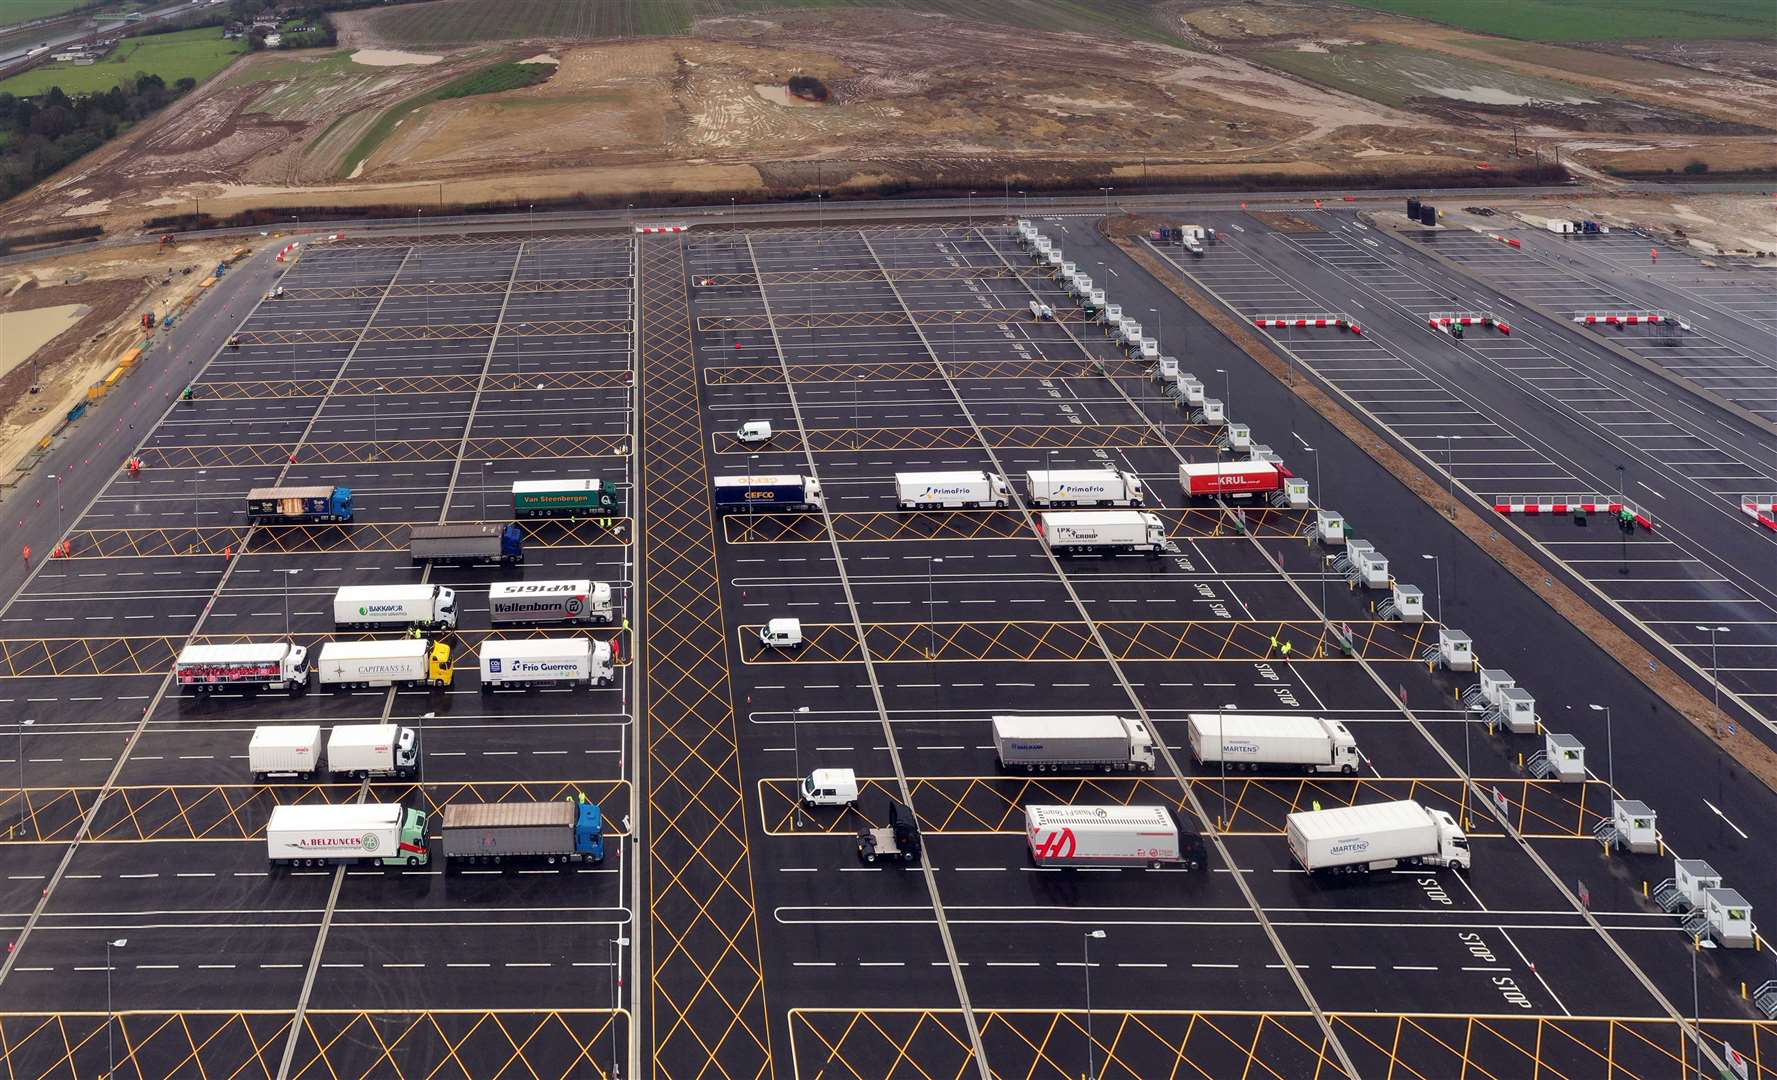 Work started on the site in July last year, with the first truckers arriving in January. Picture: Esprit Drone Services